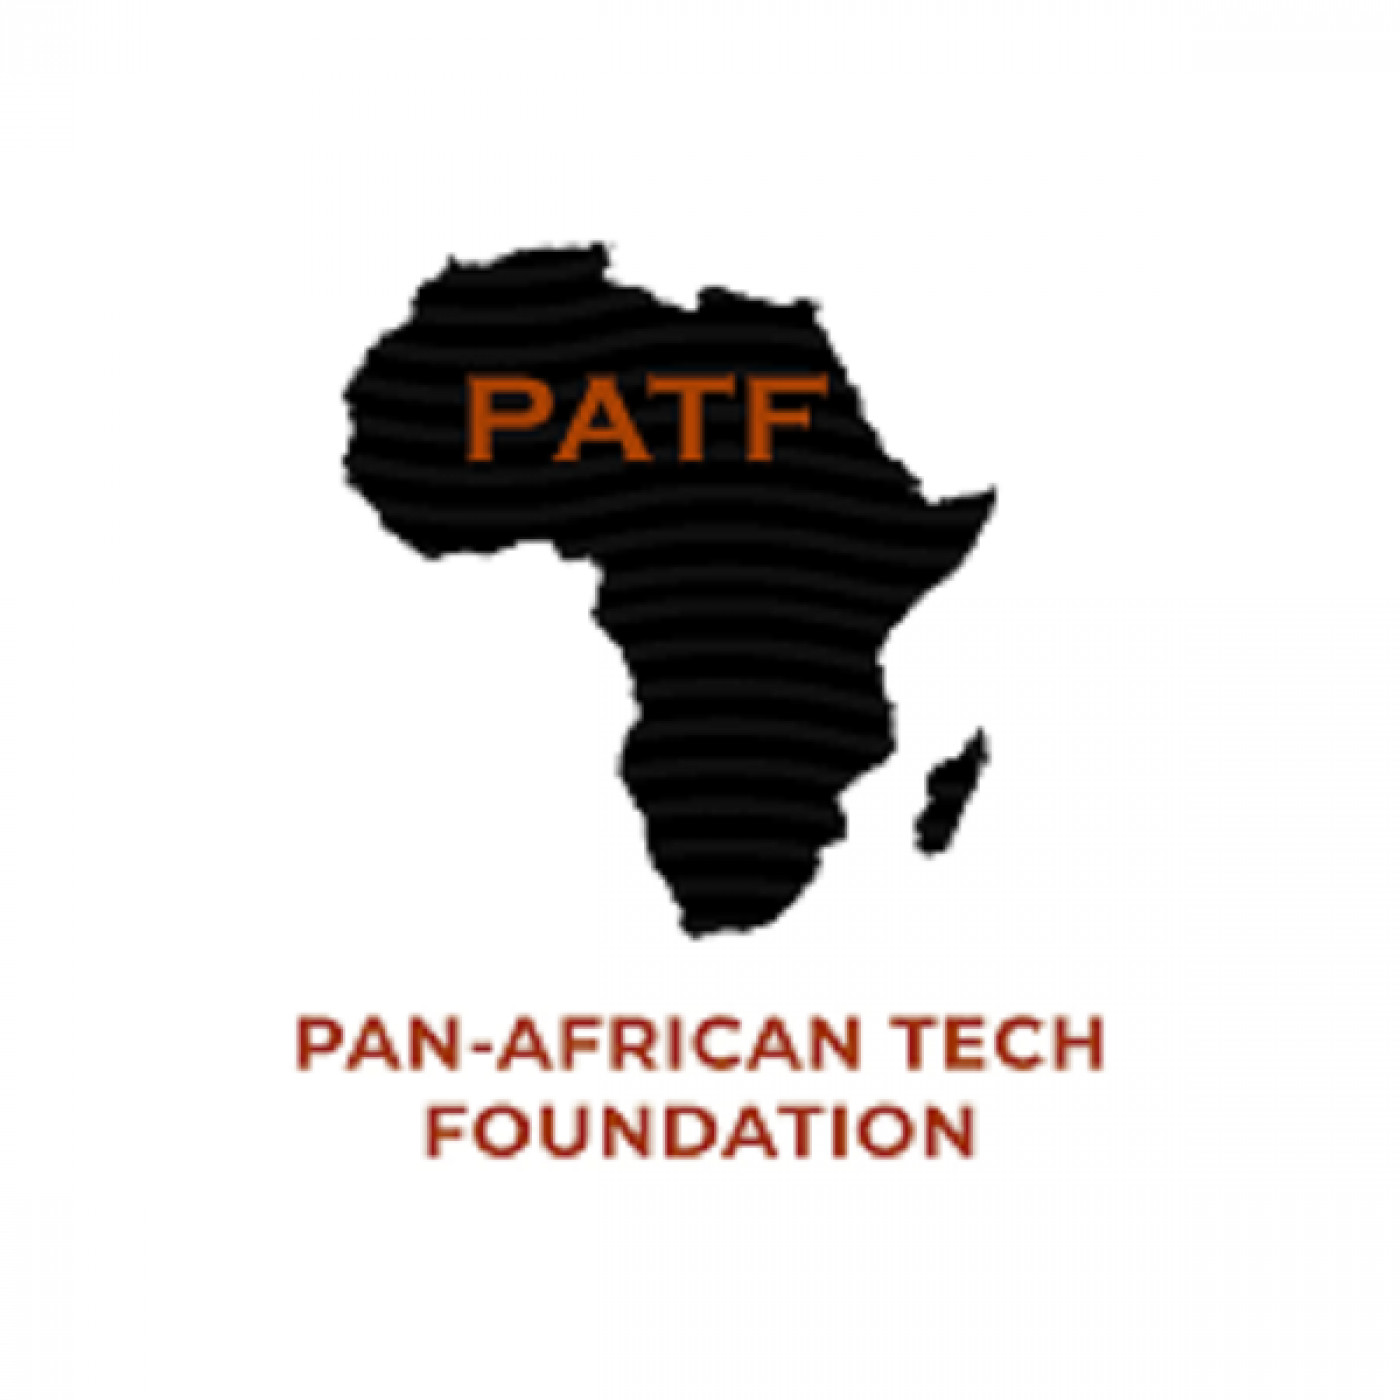 The Pan African Tech Foundation